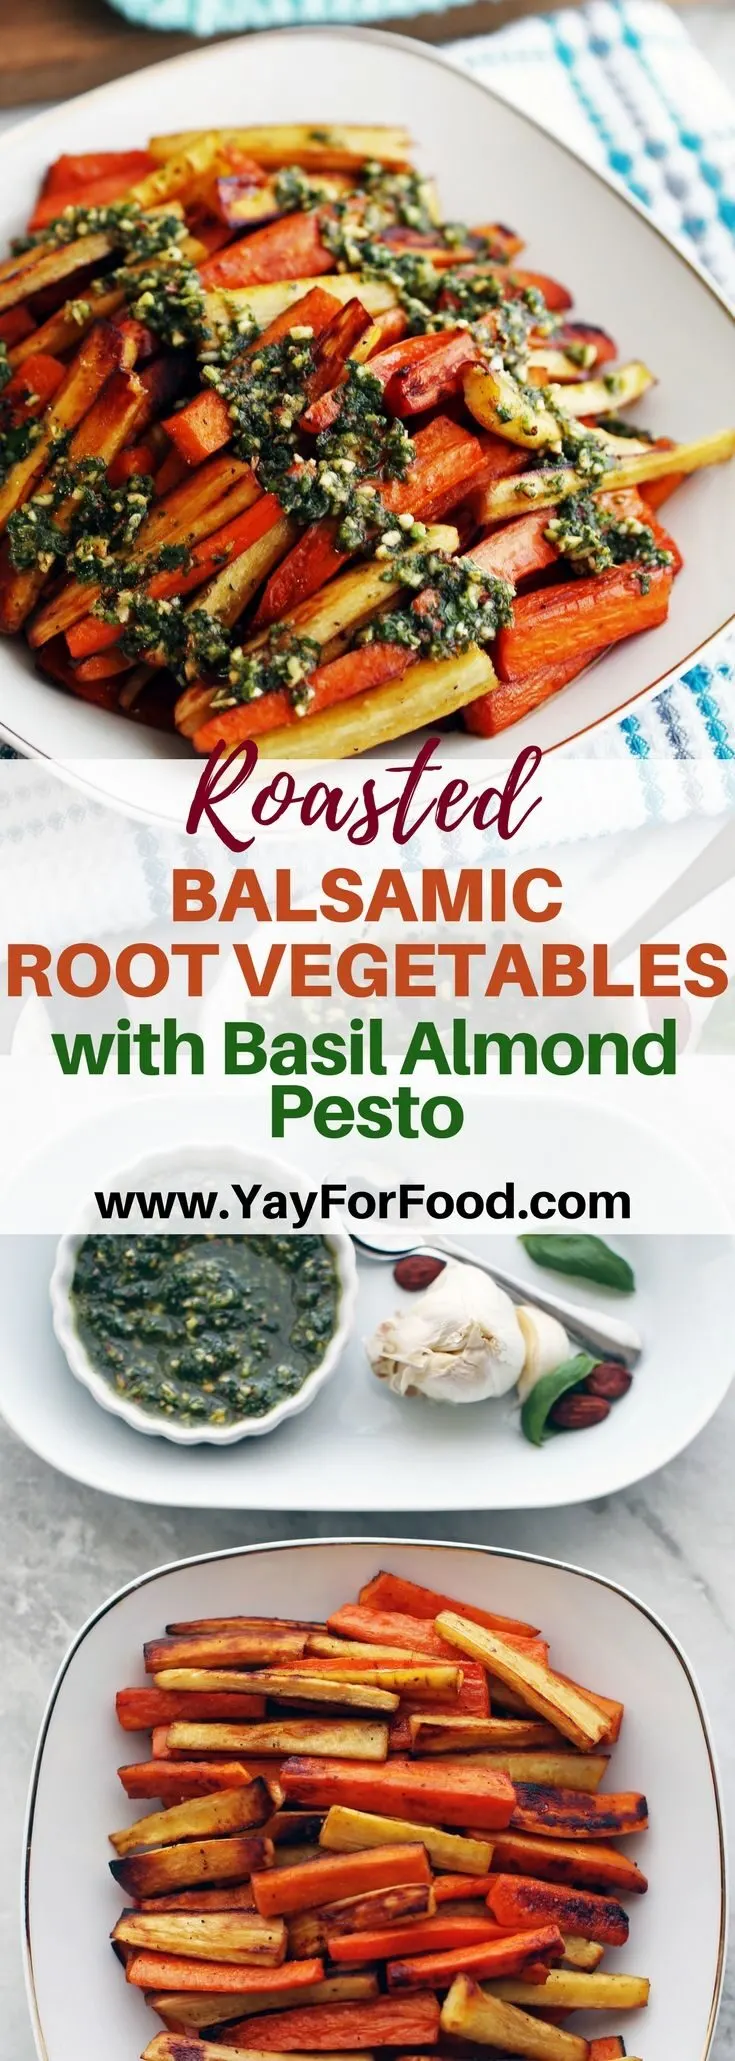  "Savory Roasted Root Vegetable Medley Recipe: A Flavorful and Nutritious Side Dish for Any Meal"